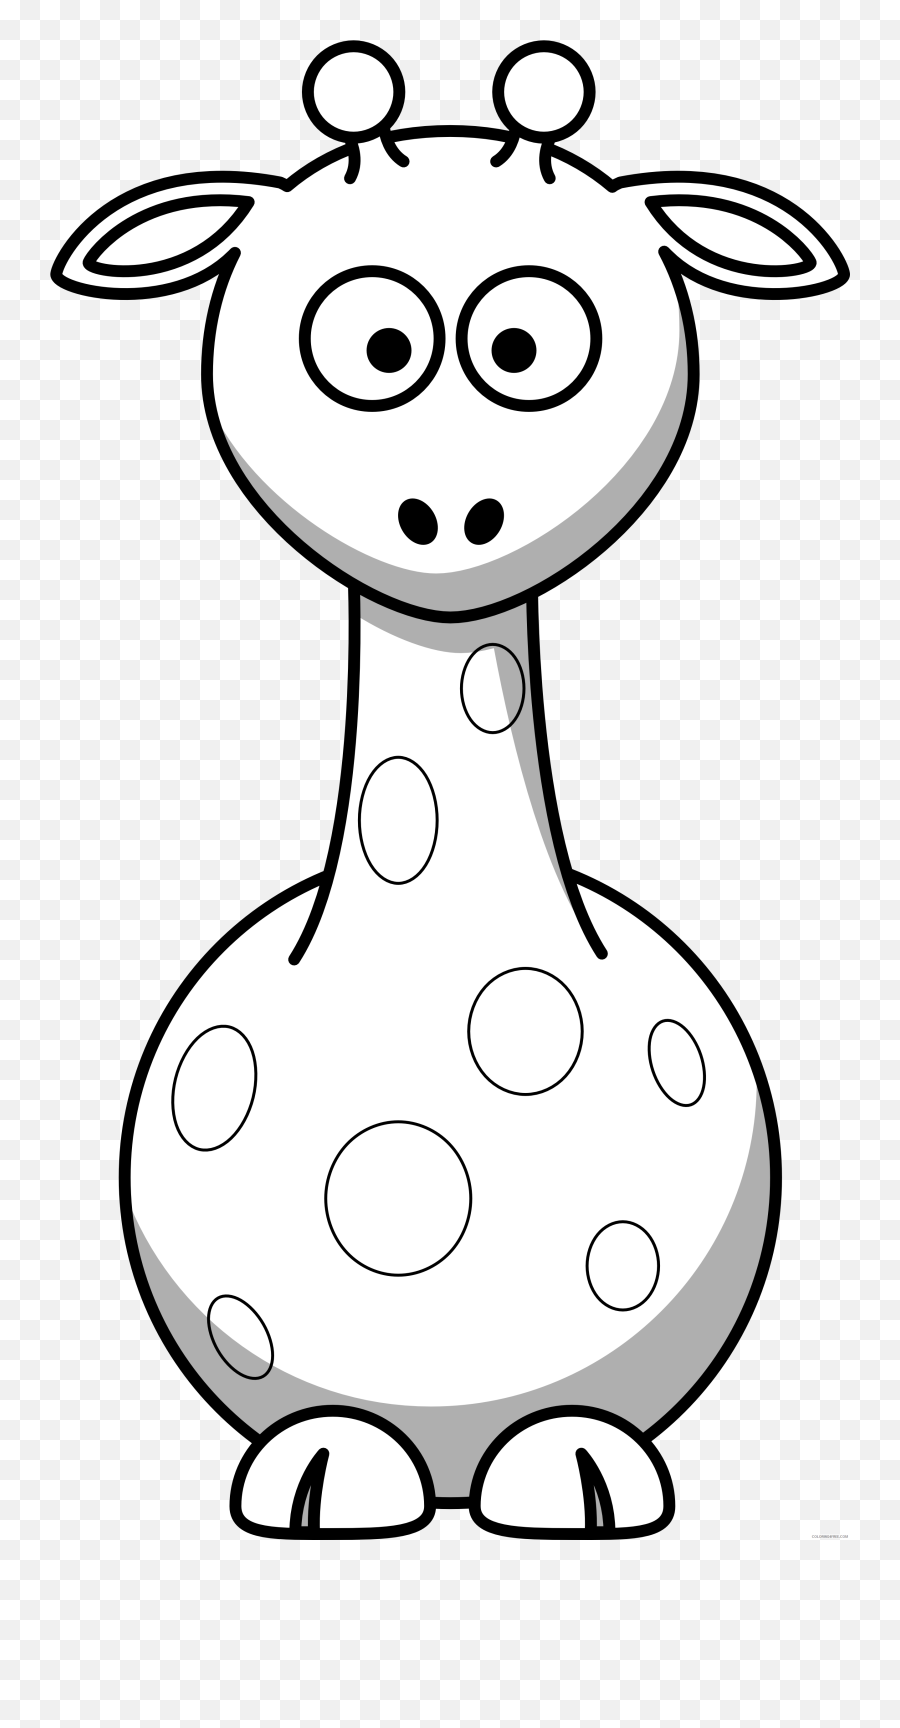 Giraffe Coloring Pages Giraffe Black And Printable - Black And White Giraffe Emoji,Giraffe Emoji